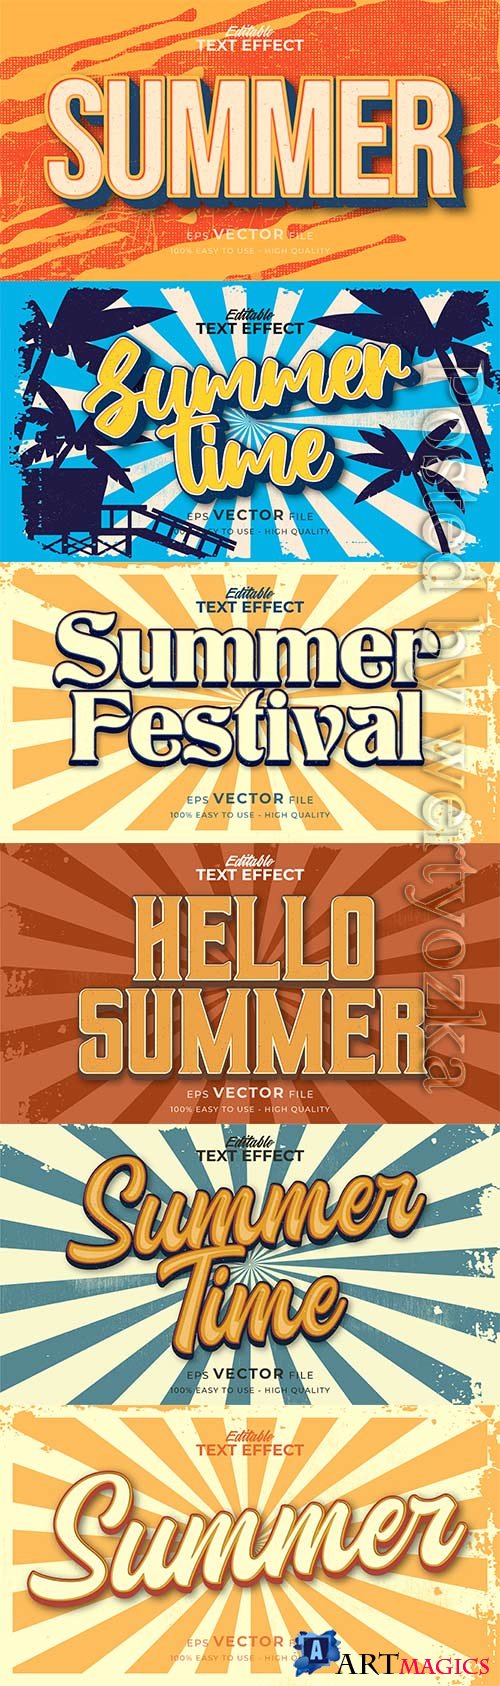 Retro summer holiday text in grunge style theme in vector vol 3